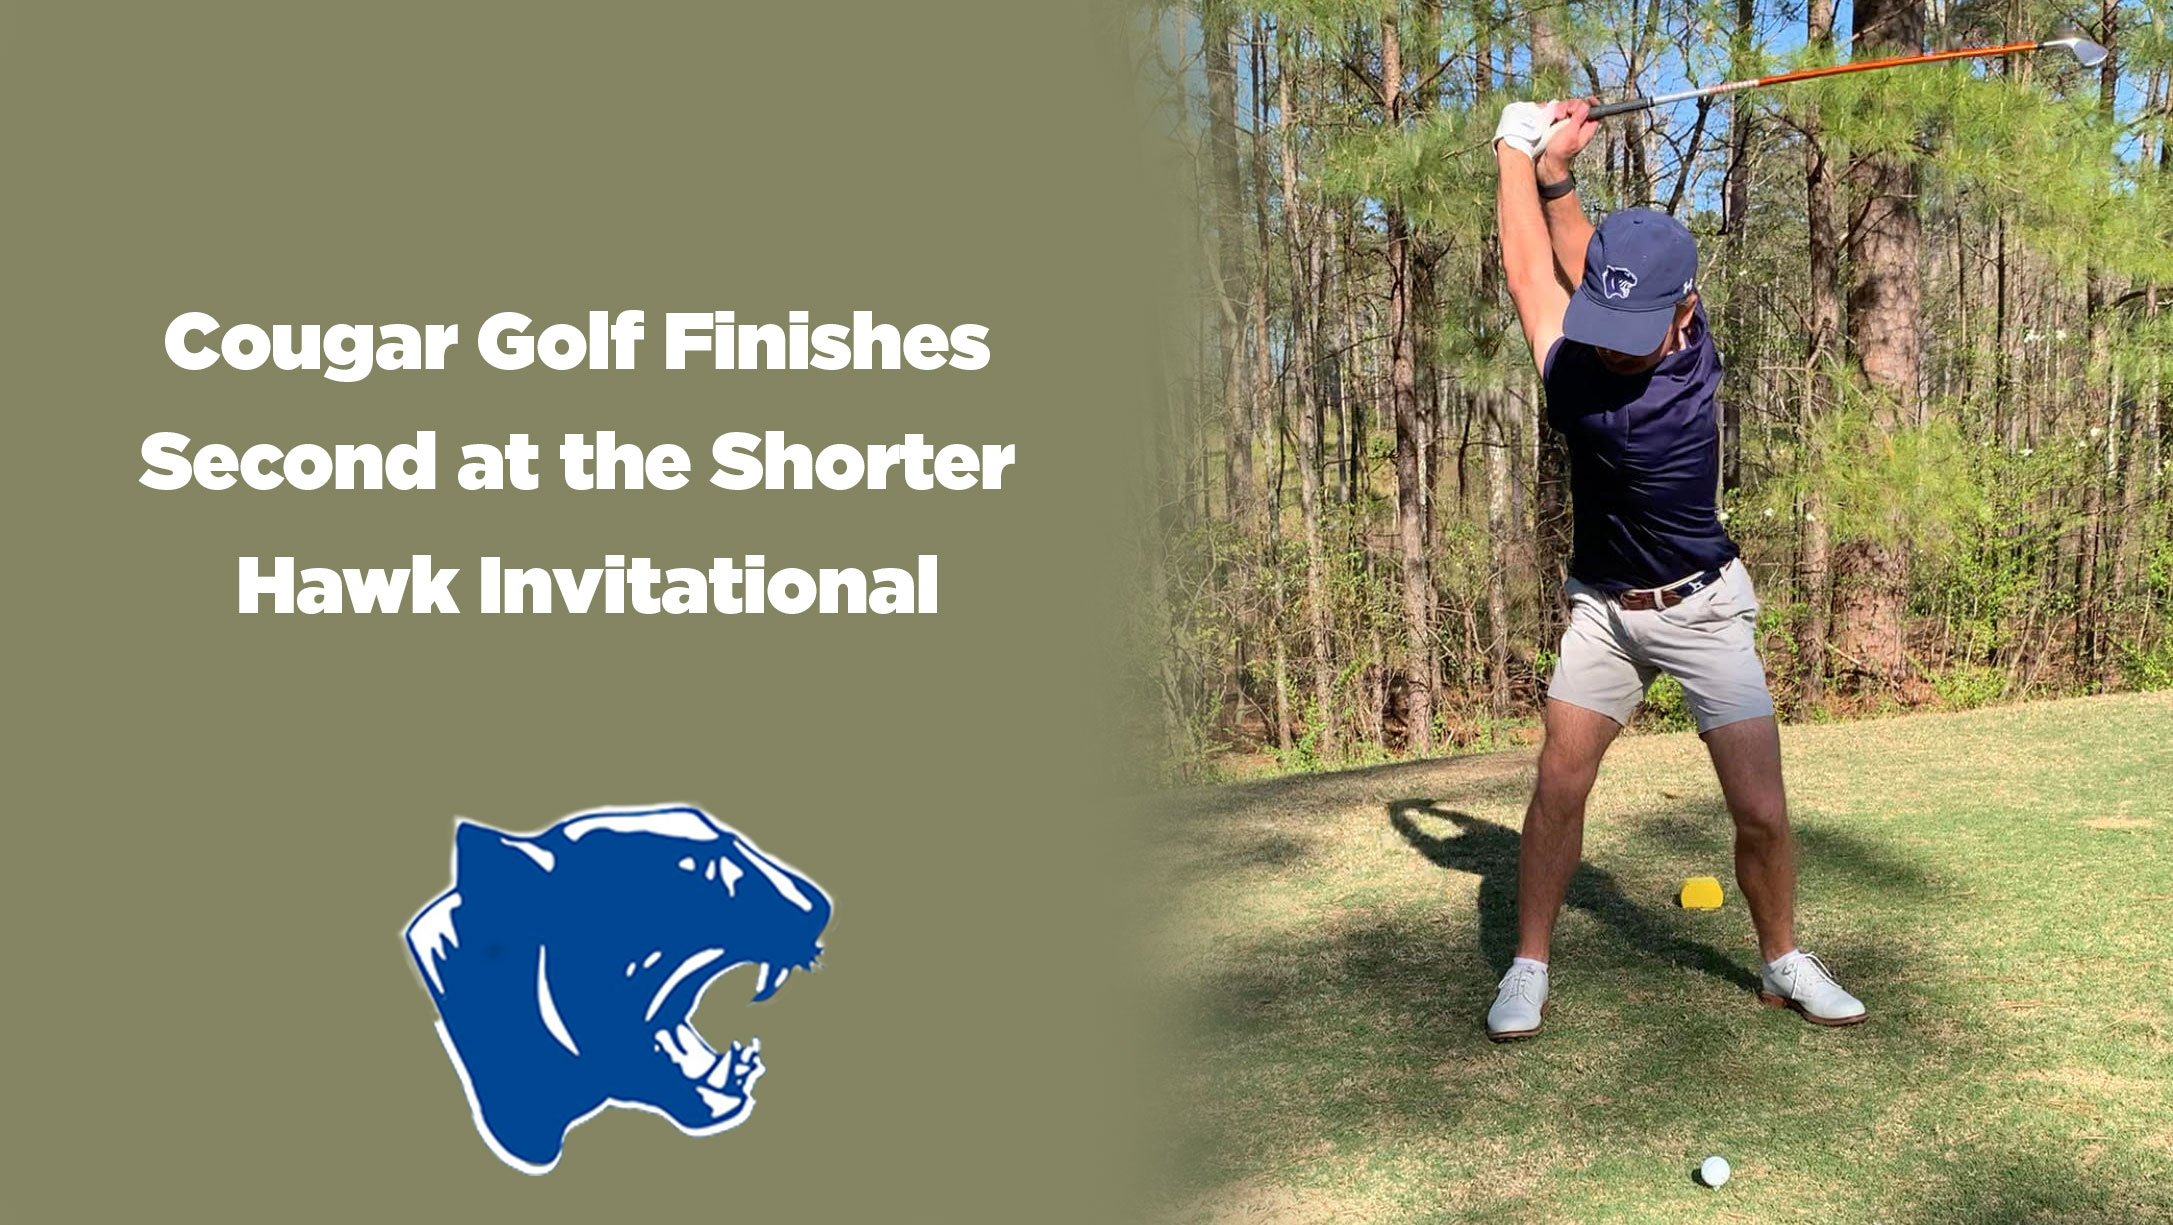 Cougar Golf Finishes Second at the Shorter Hawk Invitational